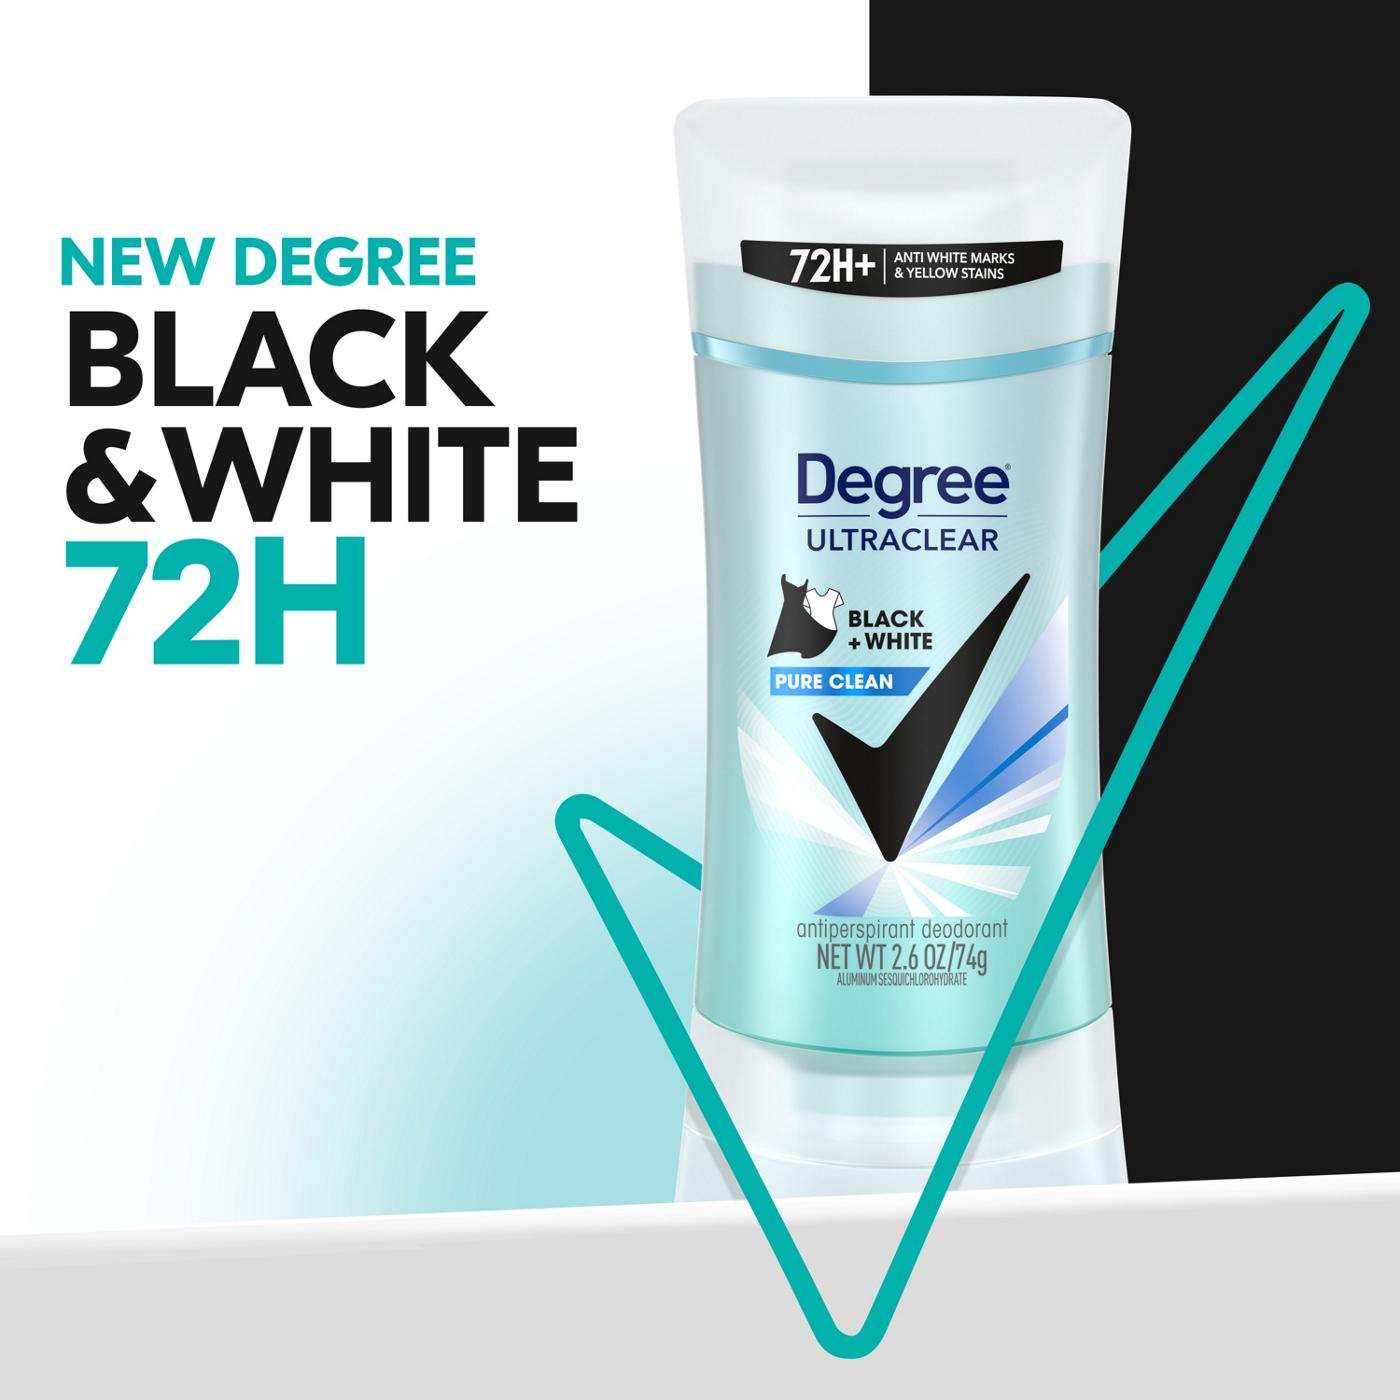 Degree Ultra Clear 72 Hr Antiperspirant Deodorant - Pure Clean; image 4 of 7